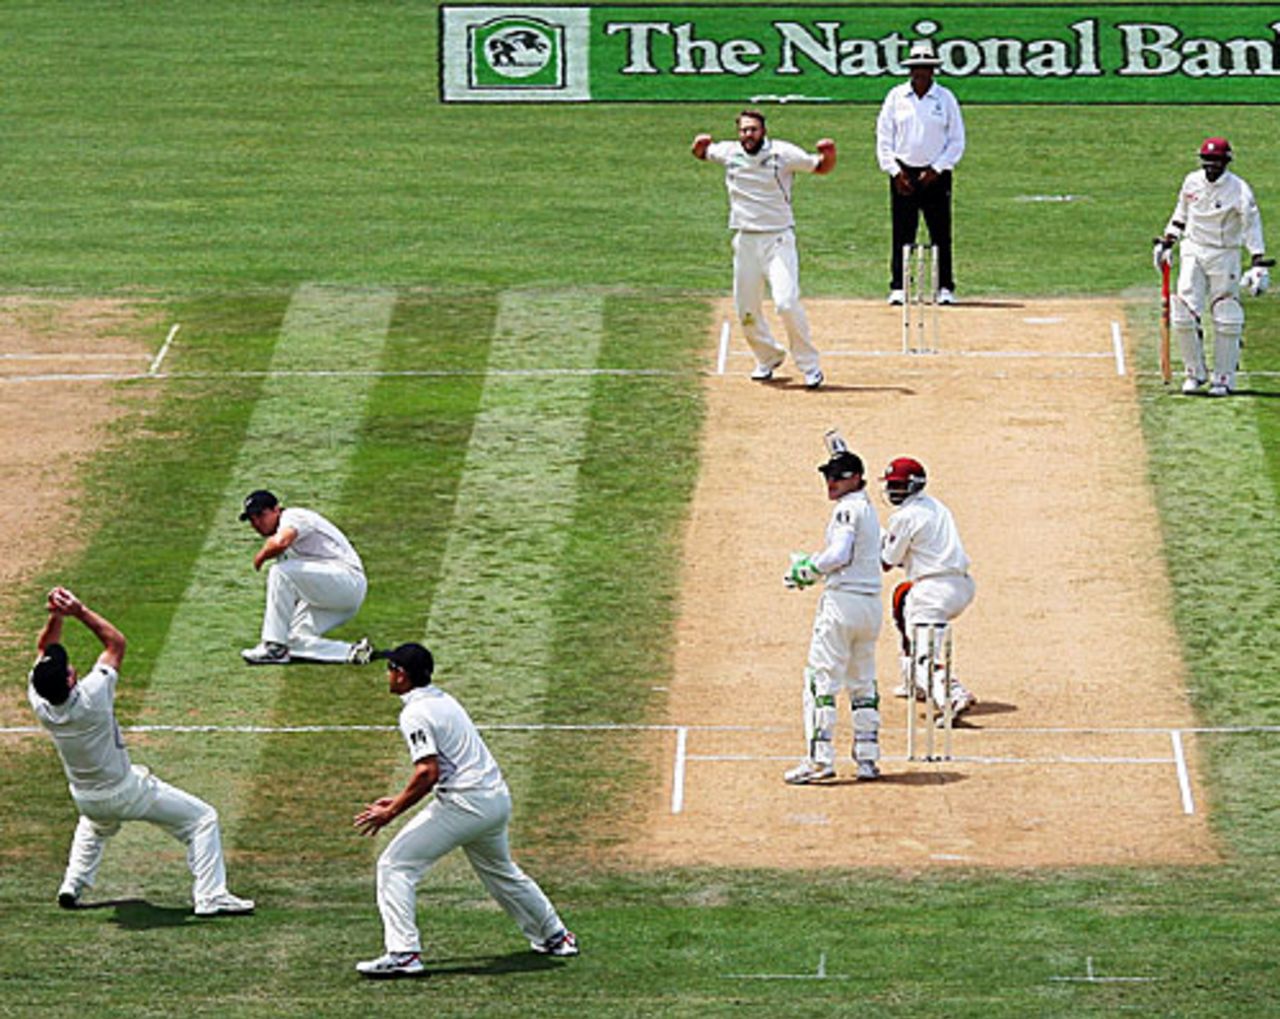 Jamie How pulls off a sharp catch at second slip to get rid of Sewnarine Chattergoon, New Zealand v West Indies, 2nd Test, Napier, 1st day, December 19, 2008